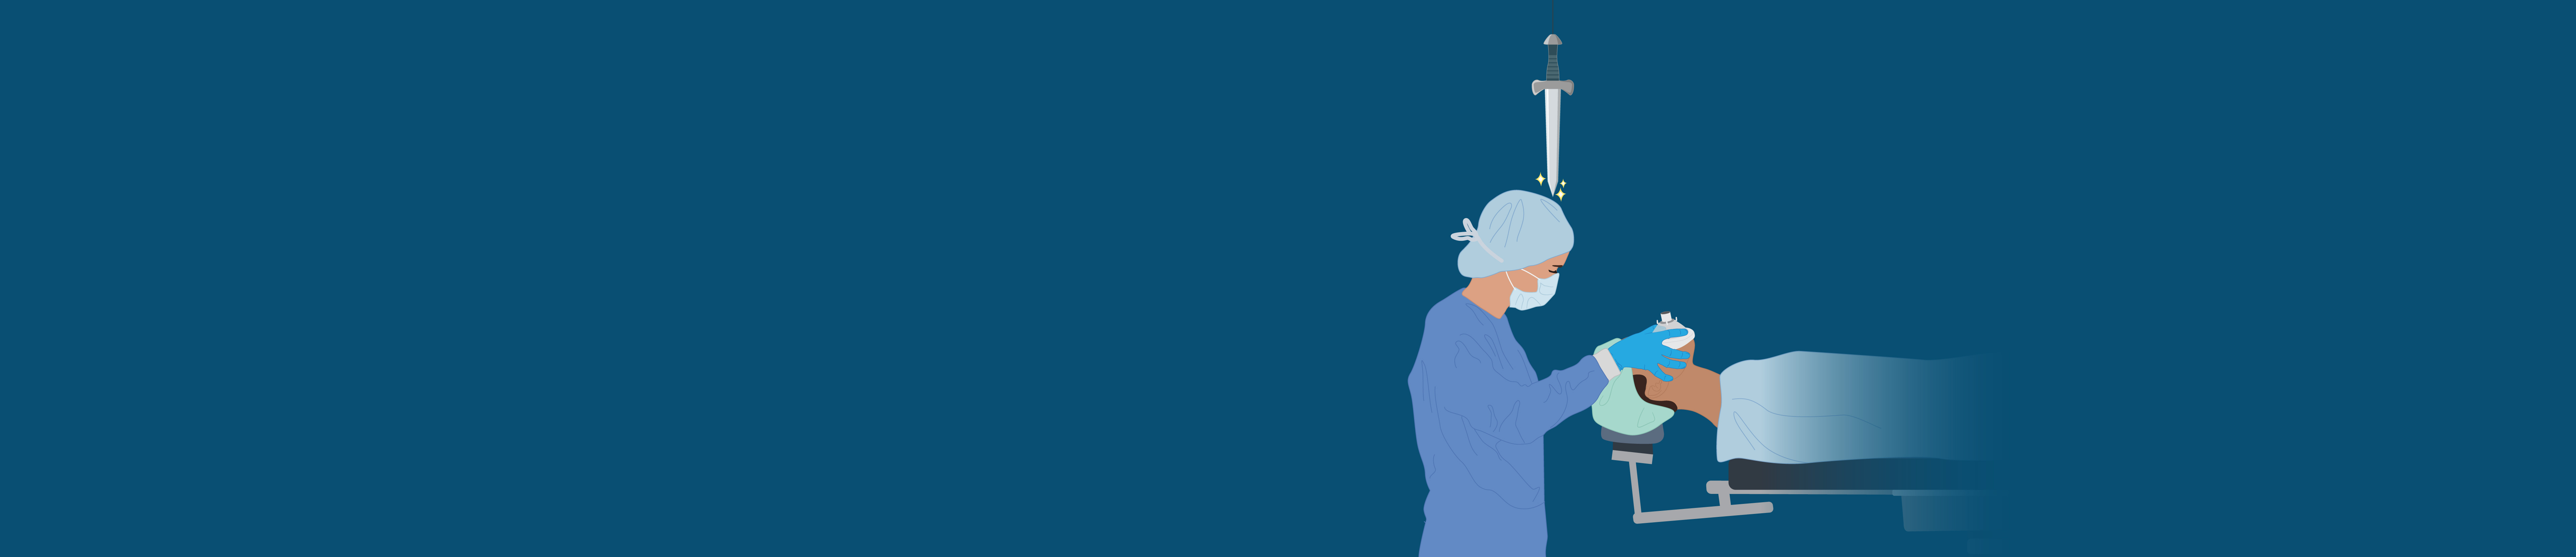 Should medical errors be criminalized? The sword of Damocles hangs over a CRNA helping a surgery patient.